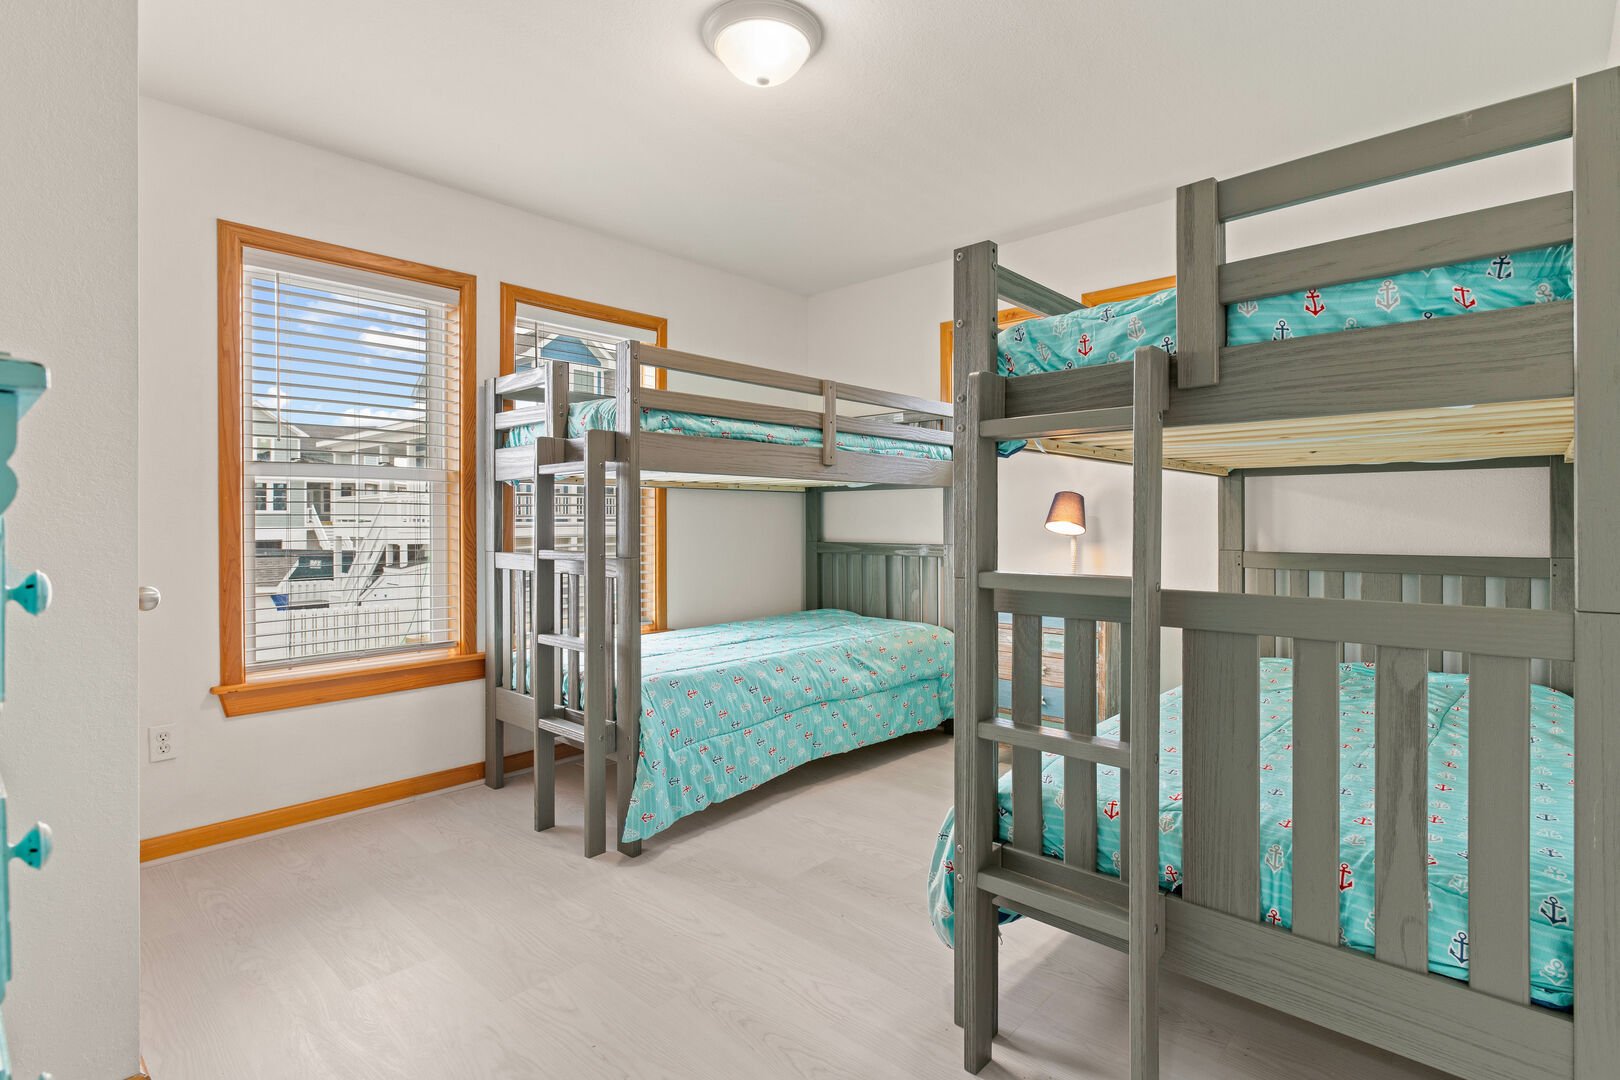 2 Bunk Bed Sets - Mid Level